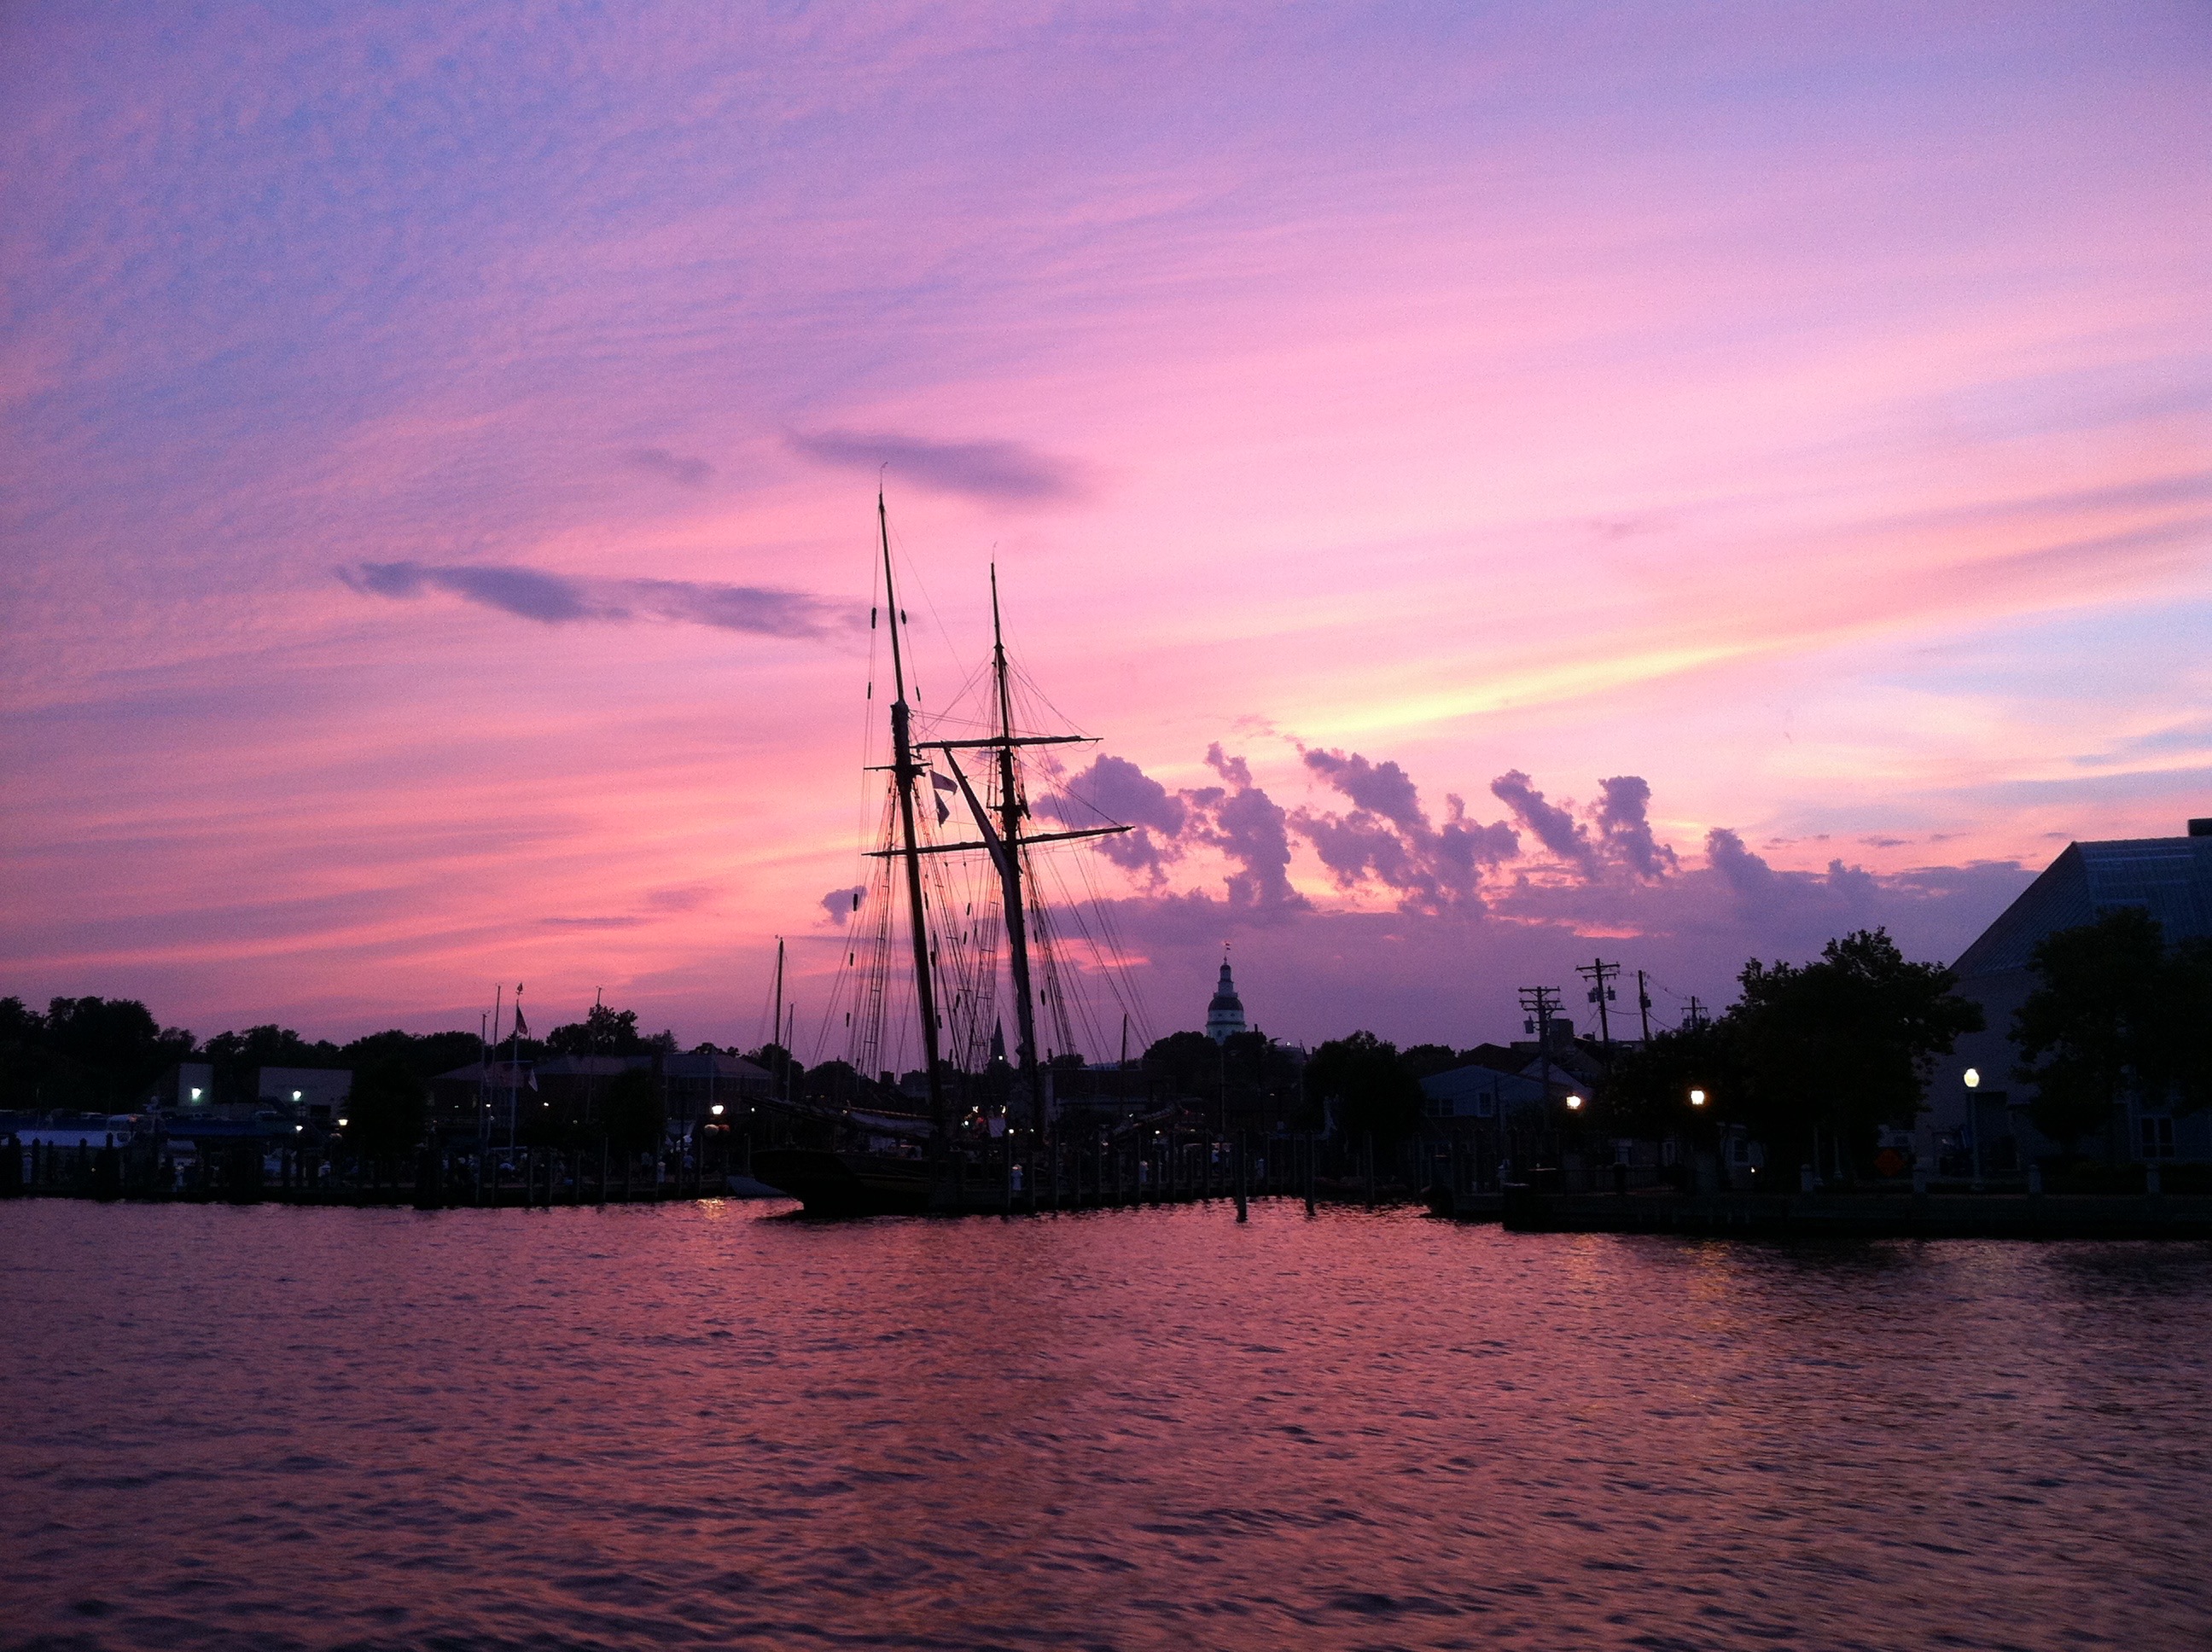 Annapolis skyline and water turned purple in sunset and silhouetting masts